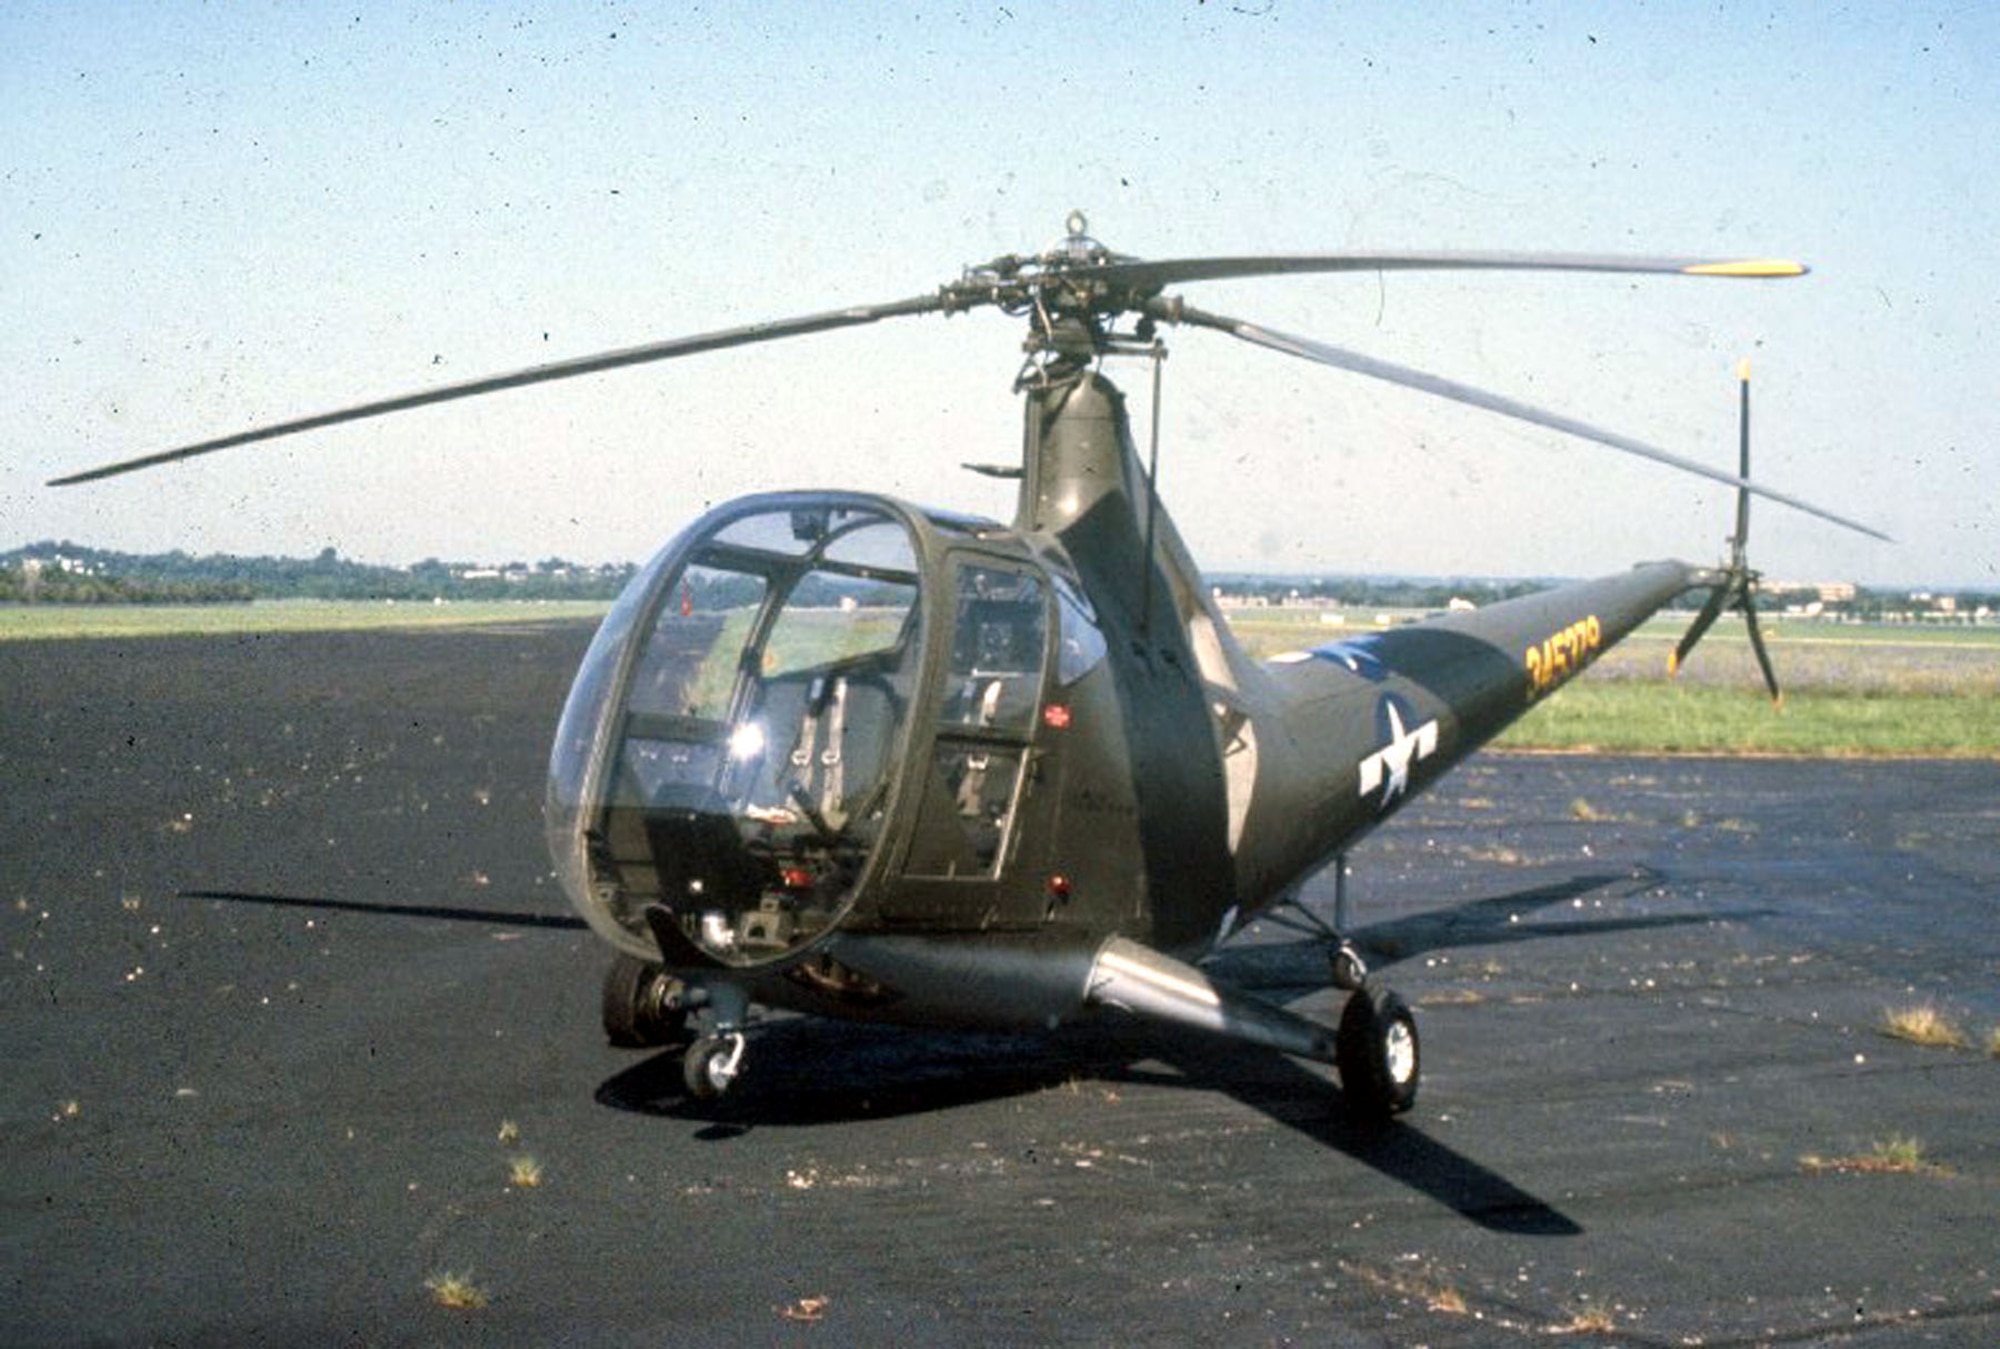 DAYTON, Ohio -- Sikorsky R-6A Hoverfly II at the National Museum of the United States Air Force. (U.S. Air Force photo)